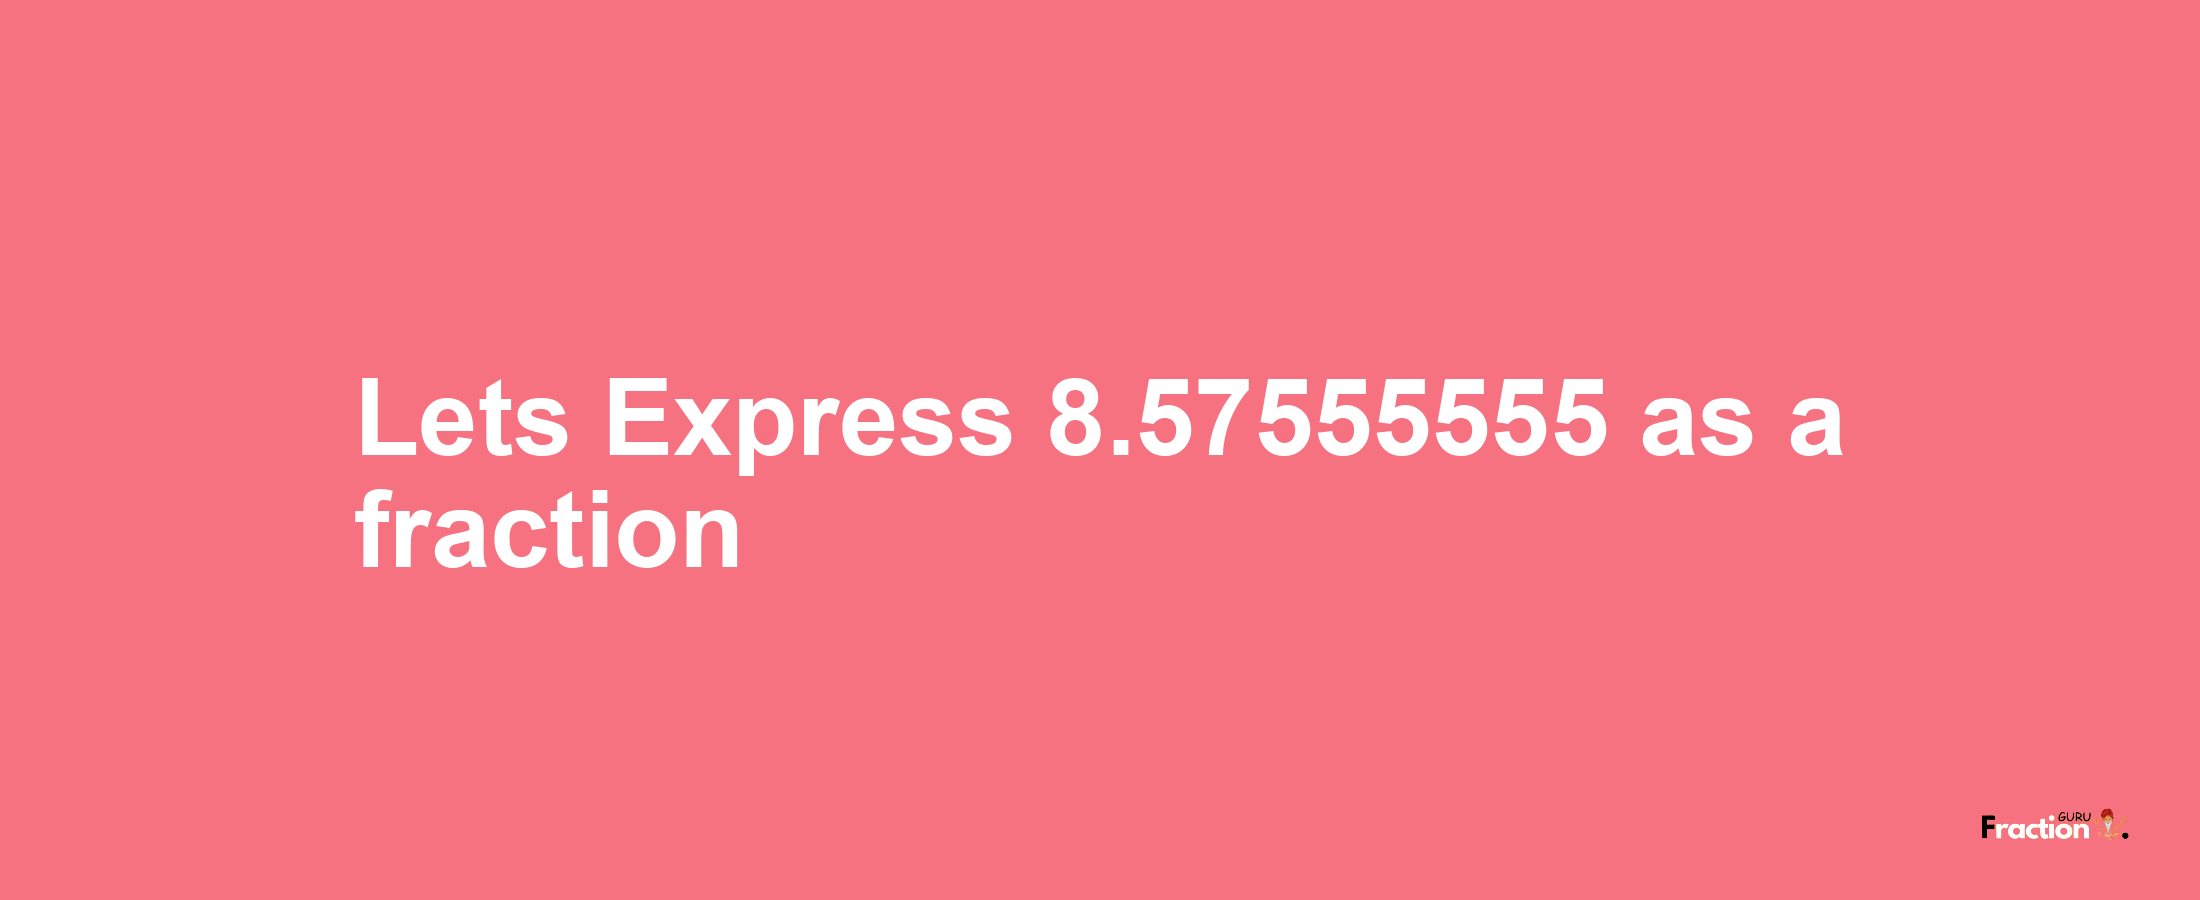 Lets Express 8.57555555 as afraction